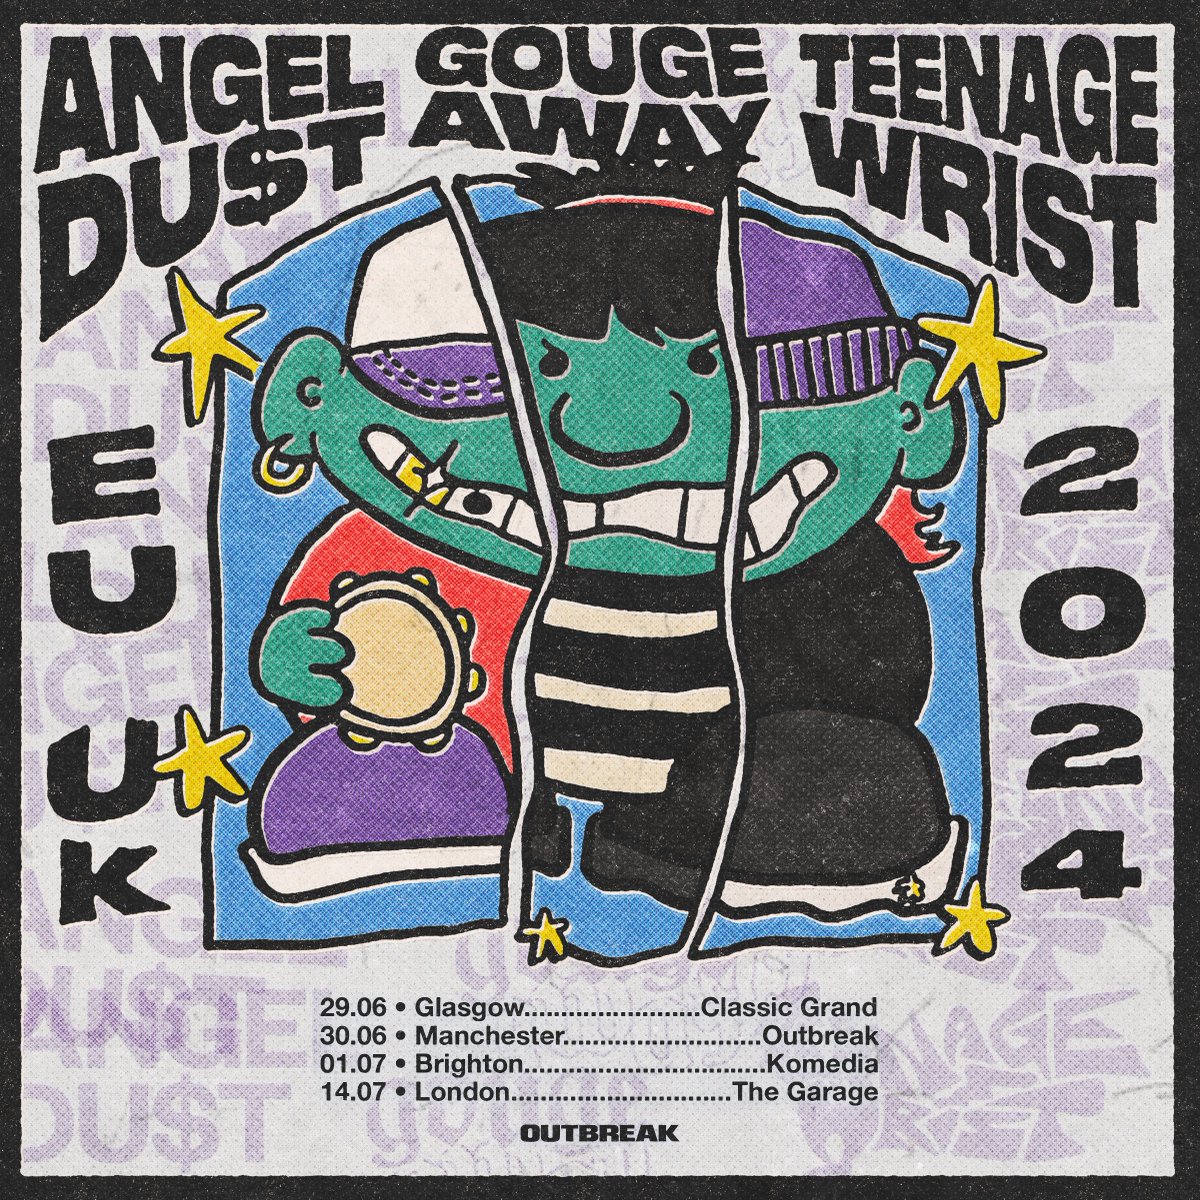 Very happy to be bringing this line-up to the UK in the summer. Tickets on sale Friday 10am! outbreak-fest.co.uk @angeldustmoney / @gougeawayfl / @TeenageWrist